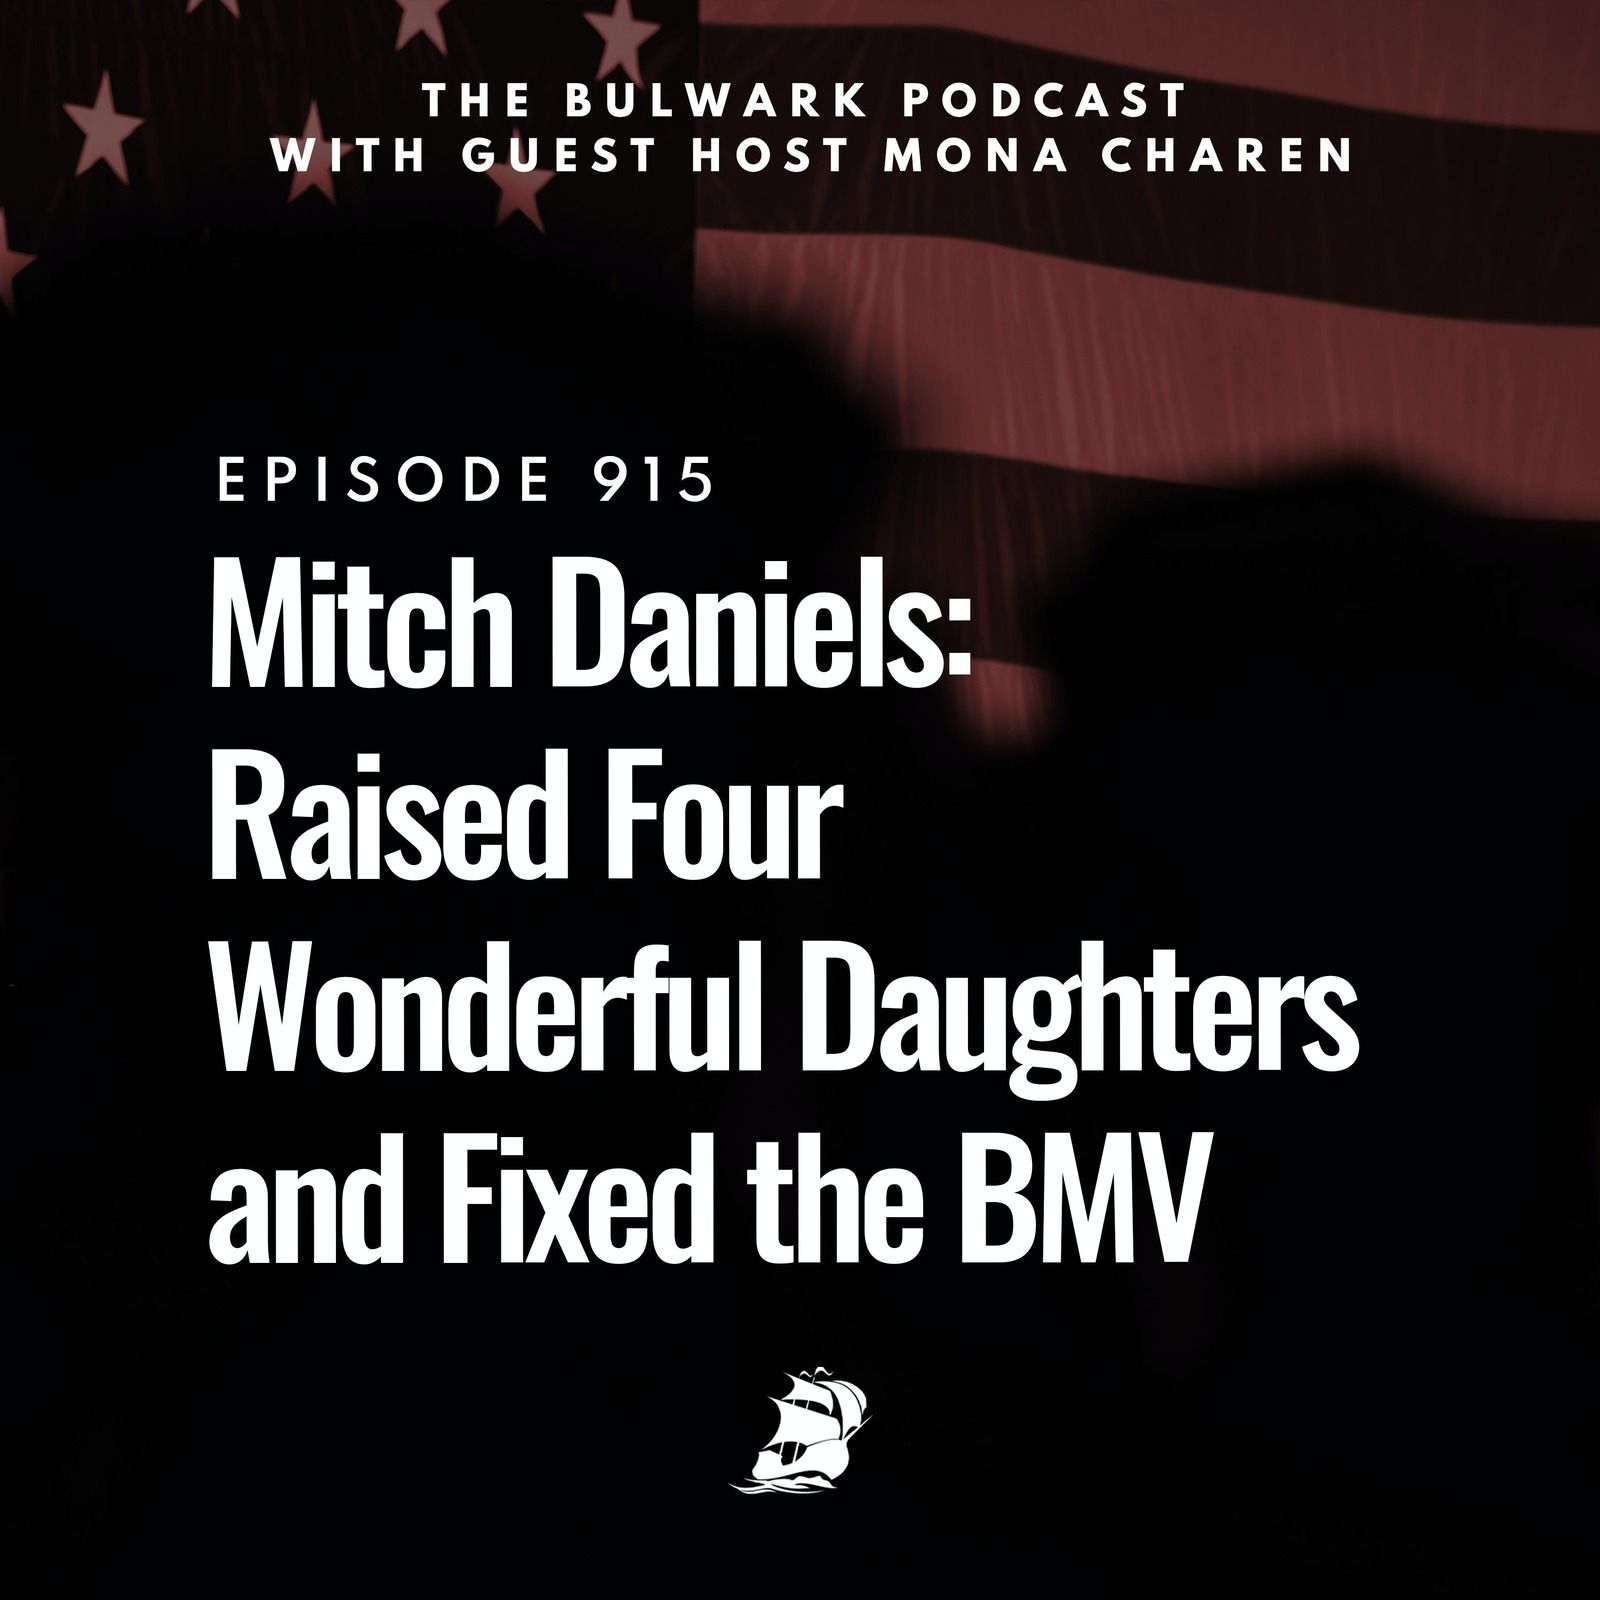 Mitch Daniels: Raised Four Wonderful Daughters and Fixed the BMV